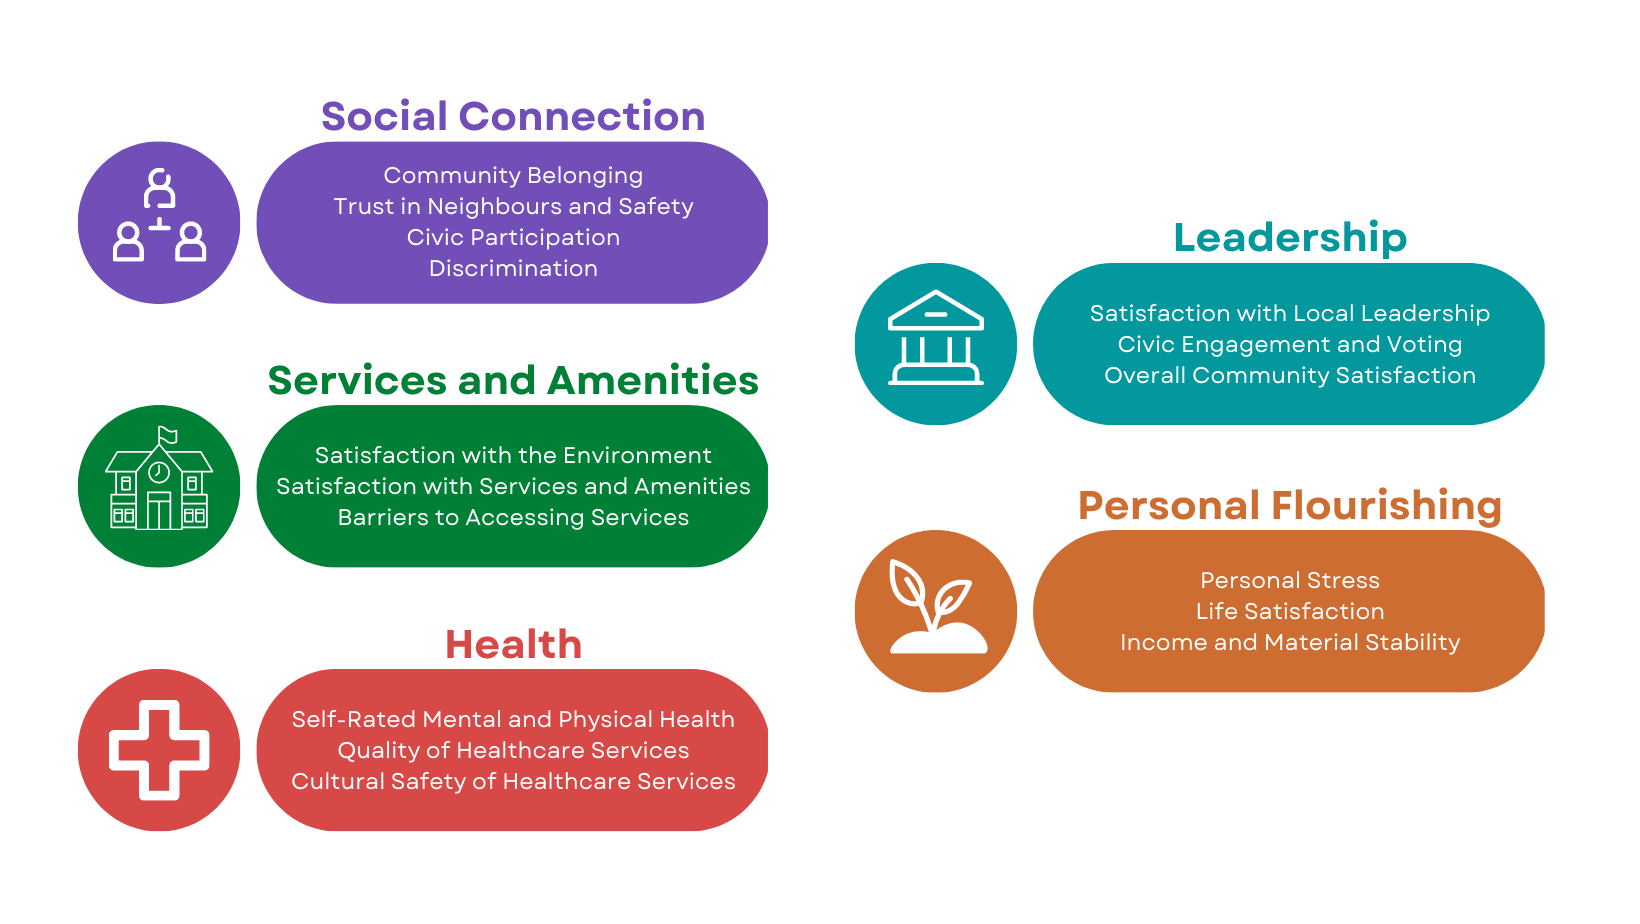 The Community Wellbeing Project - Population Health Analytics